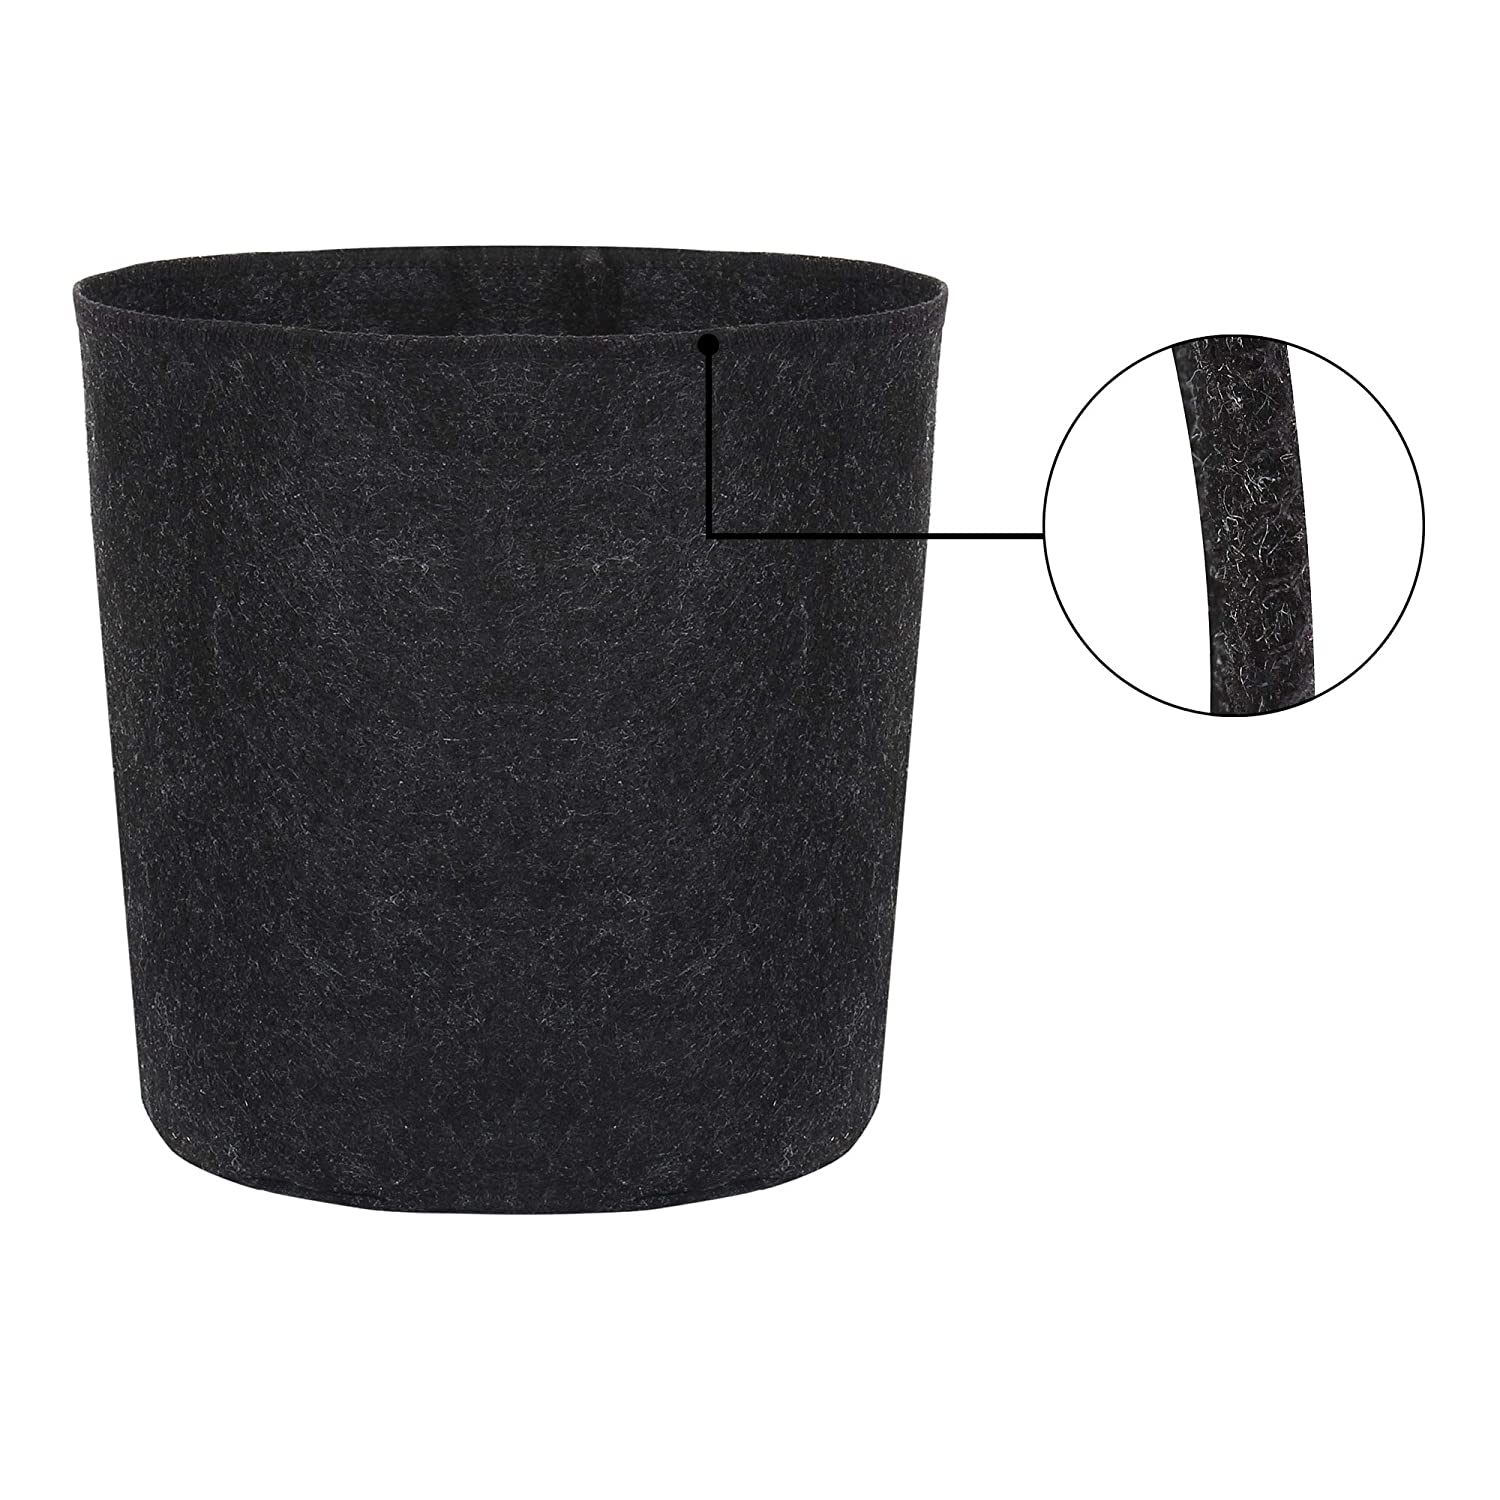 Oxypot Fabric Grow Bag (7X7 Inches) with 3 Gardening Tools